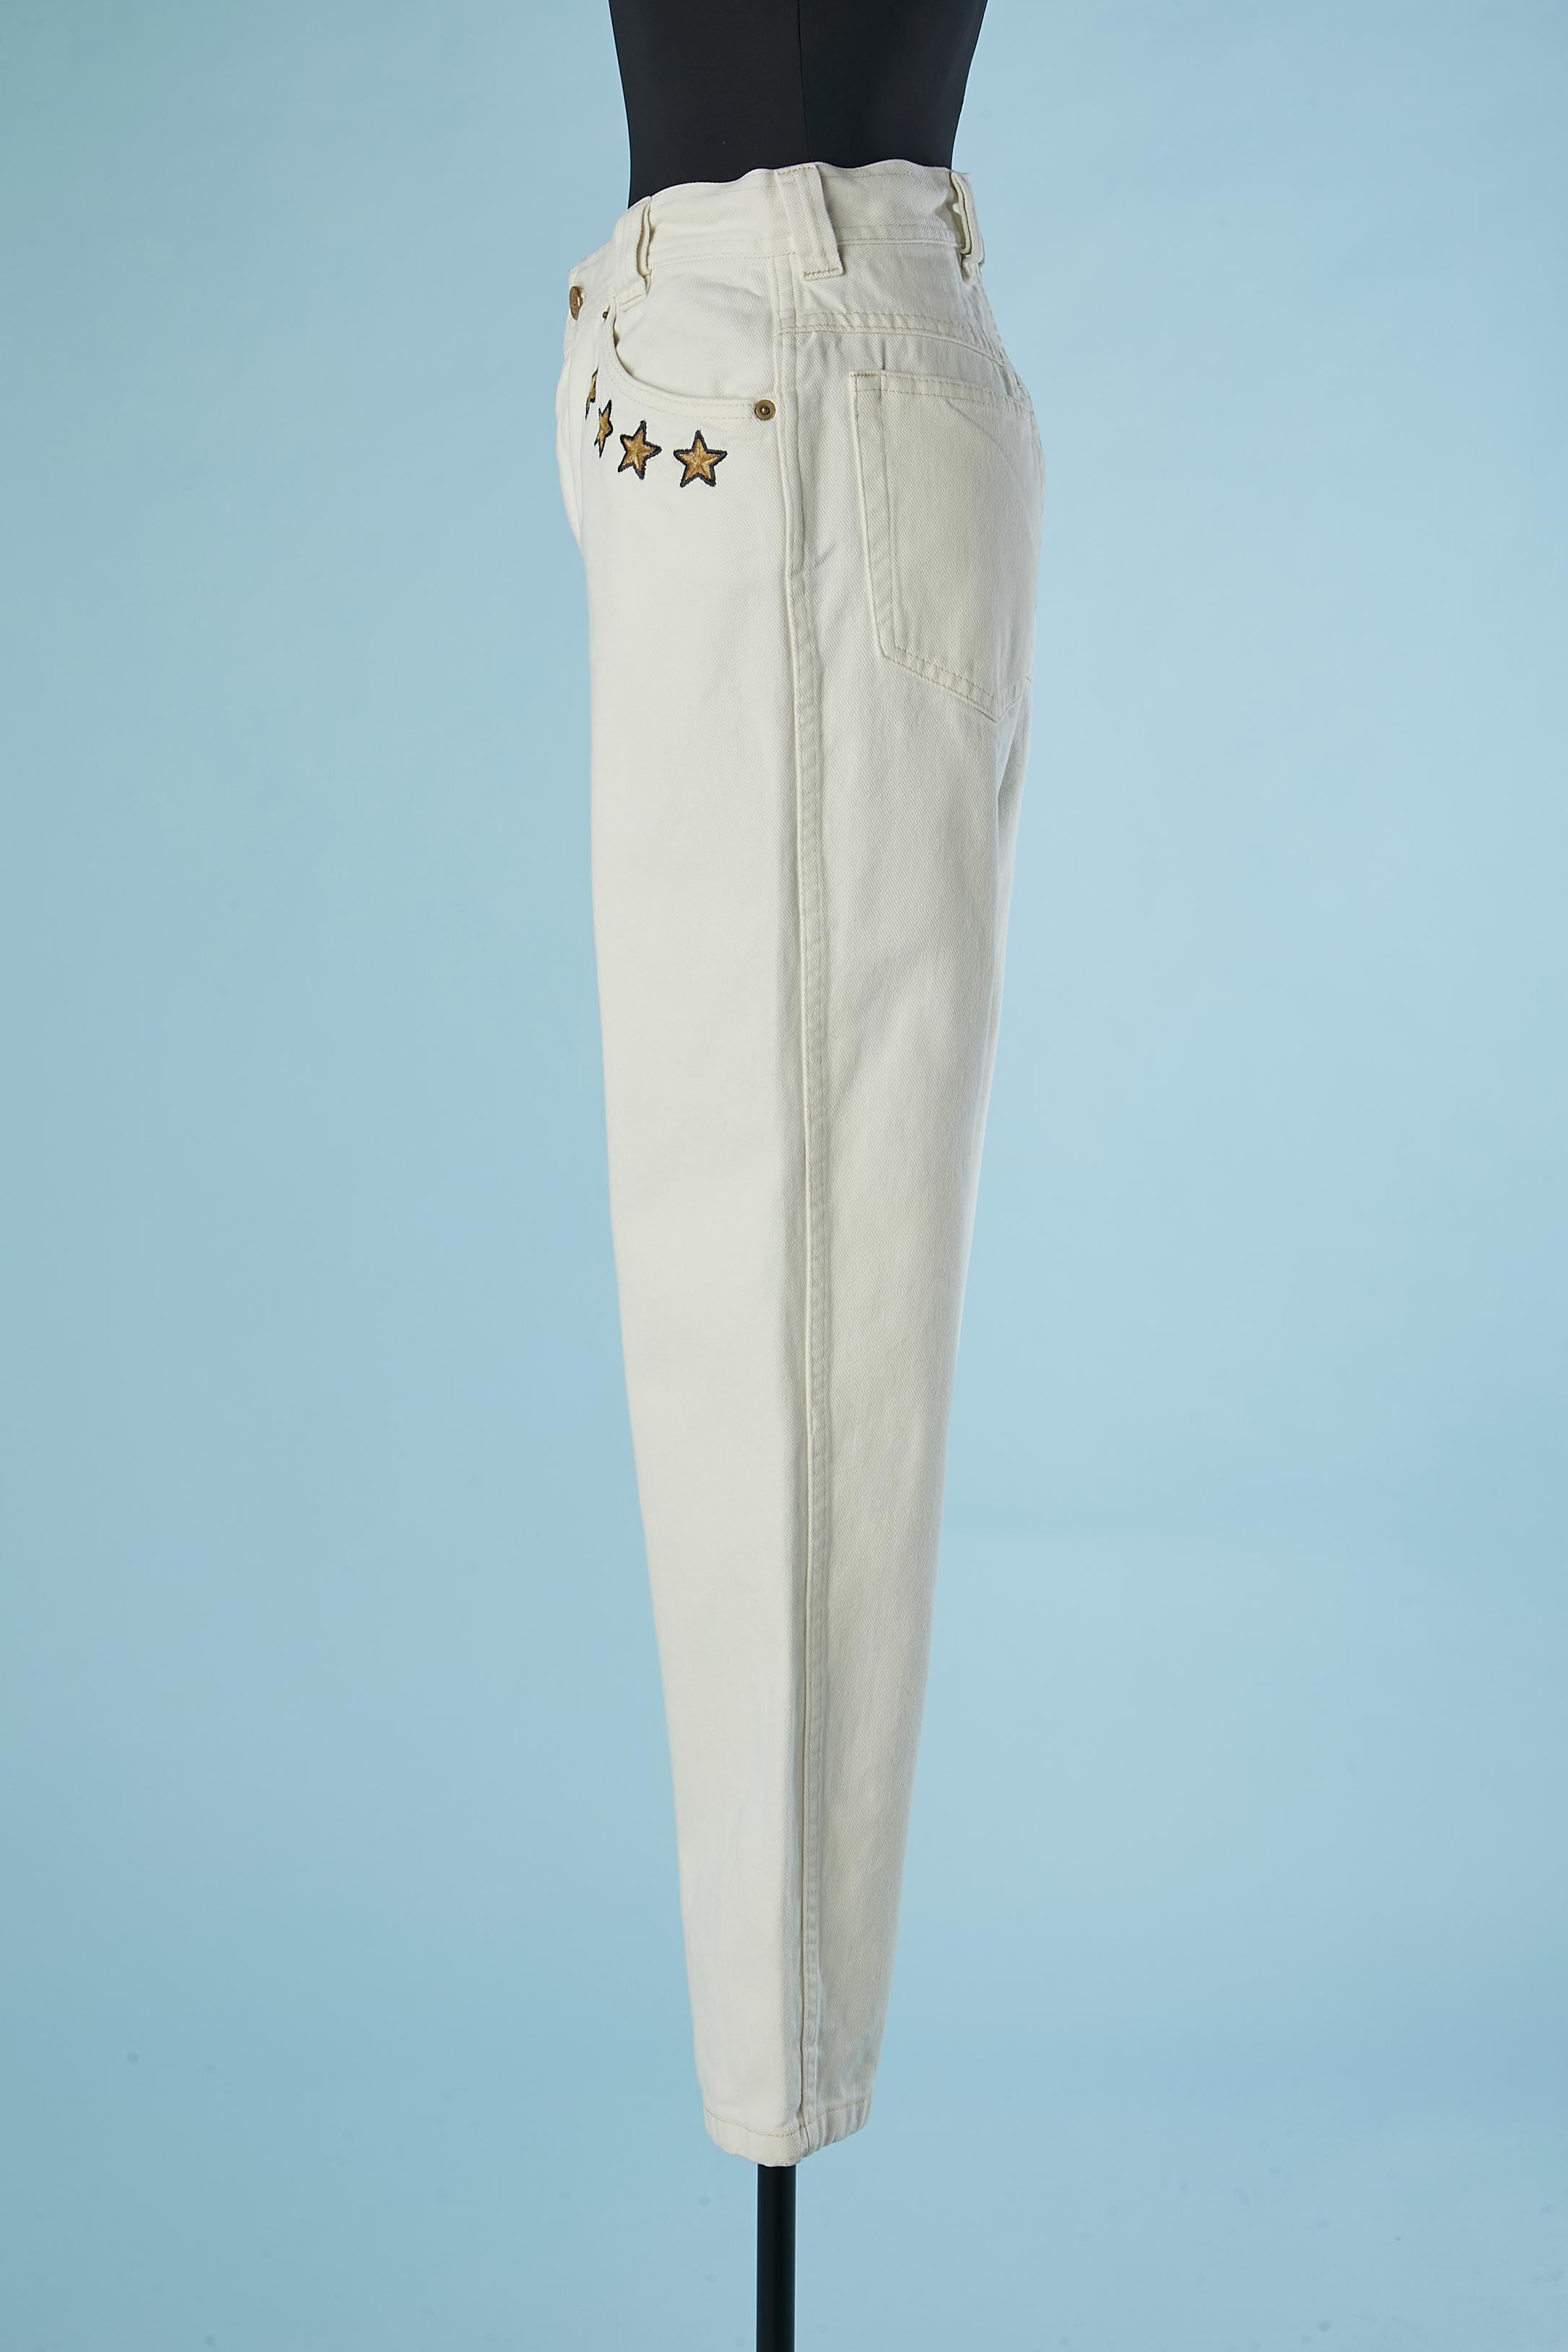 Women's Off-white denim jean with stars and anchor threads embroideries Escada  For Sale